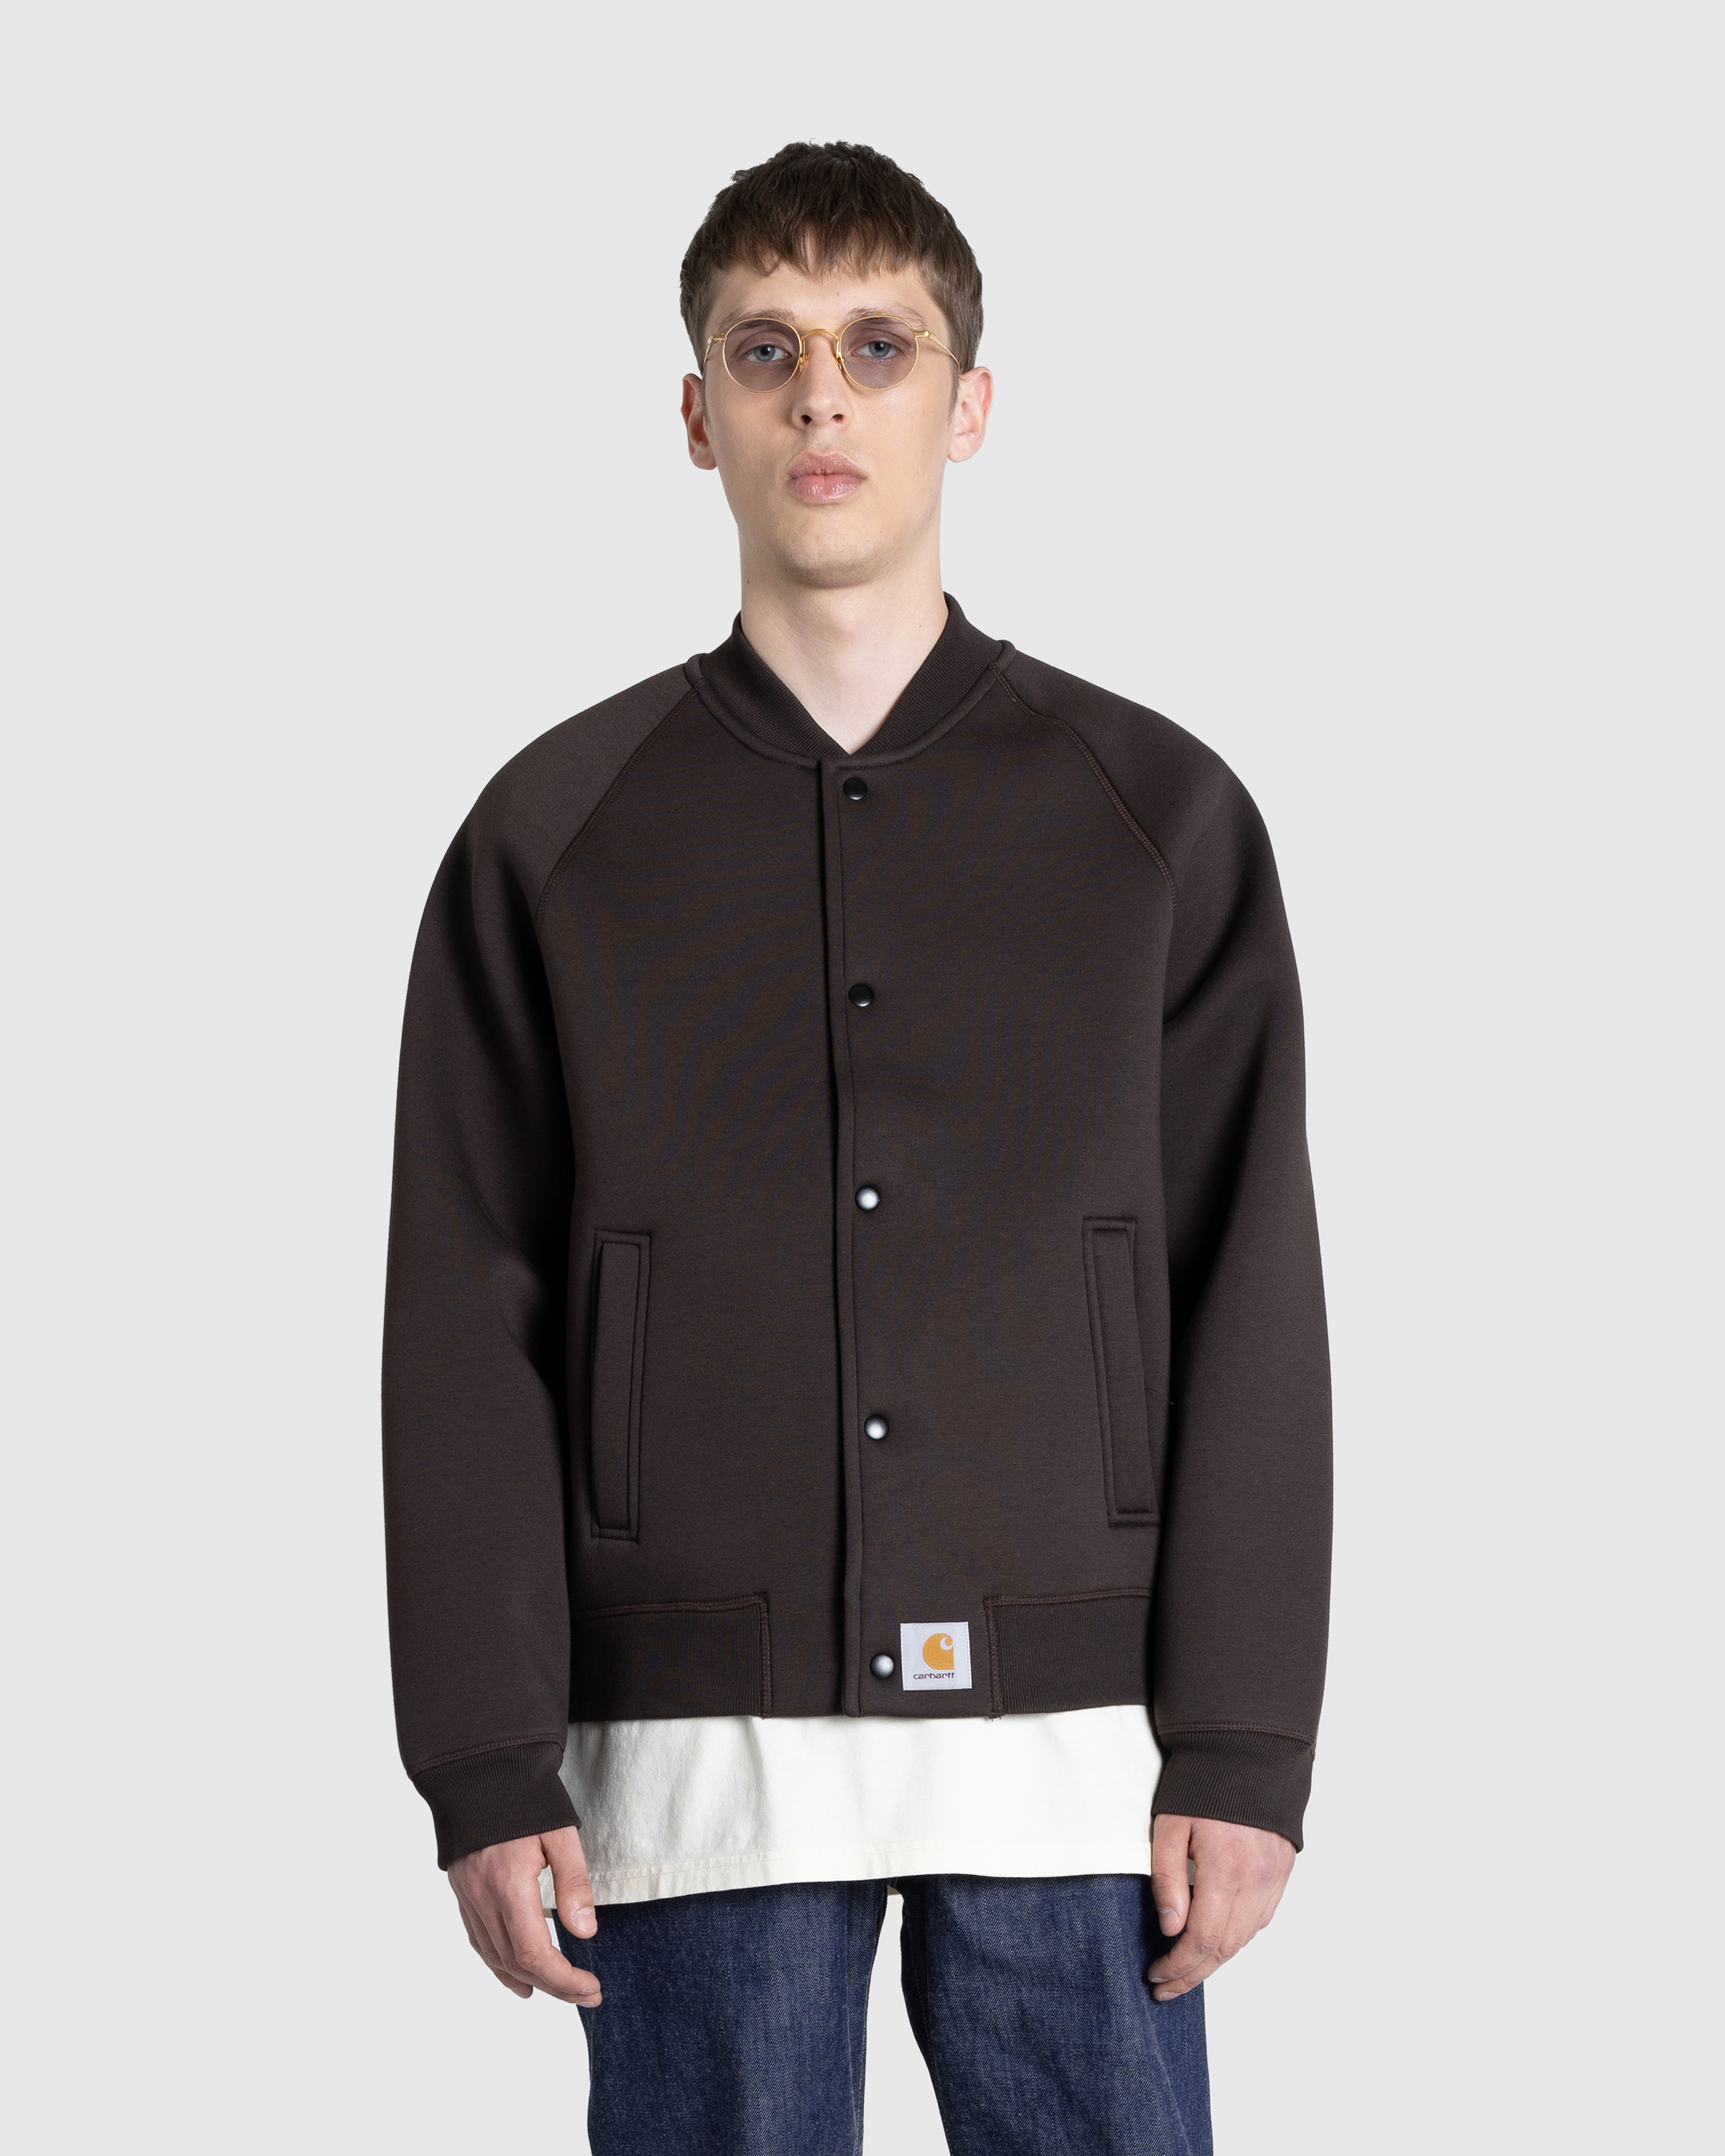 Carhartt WIP – Car-Lux Bomber Tobacco/Grey - Outerwear - Brown - Image 2